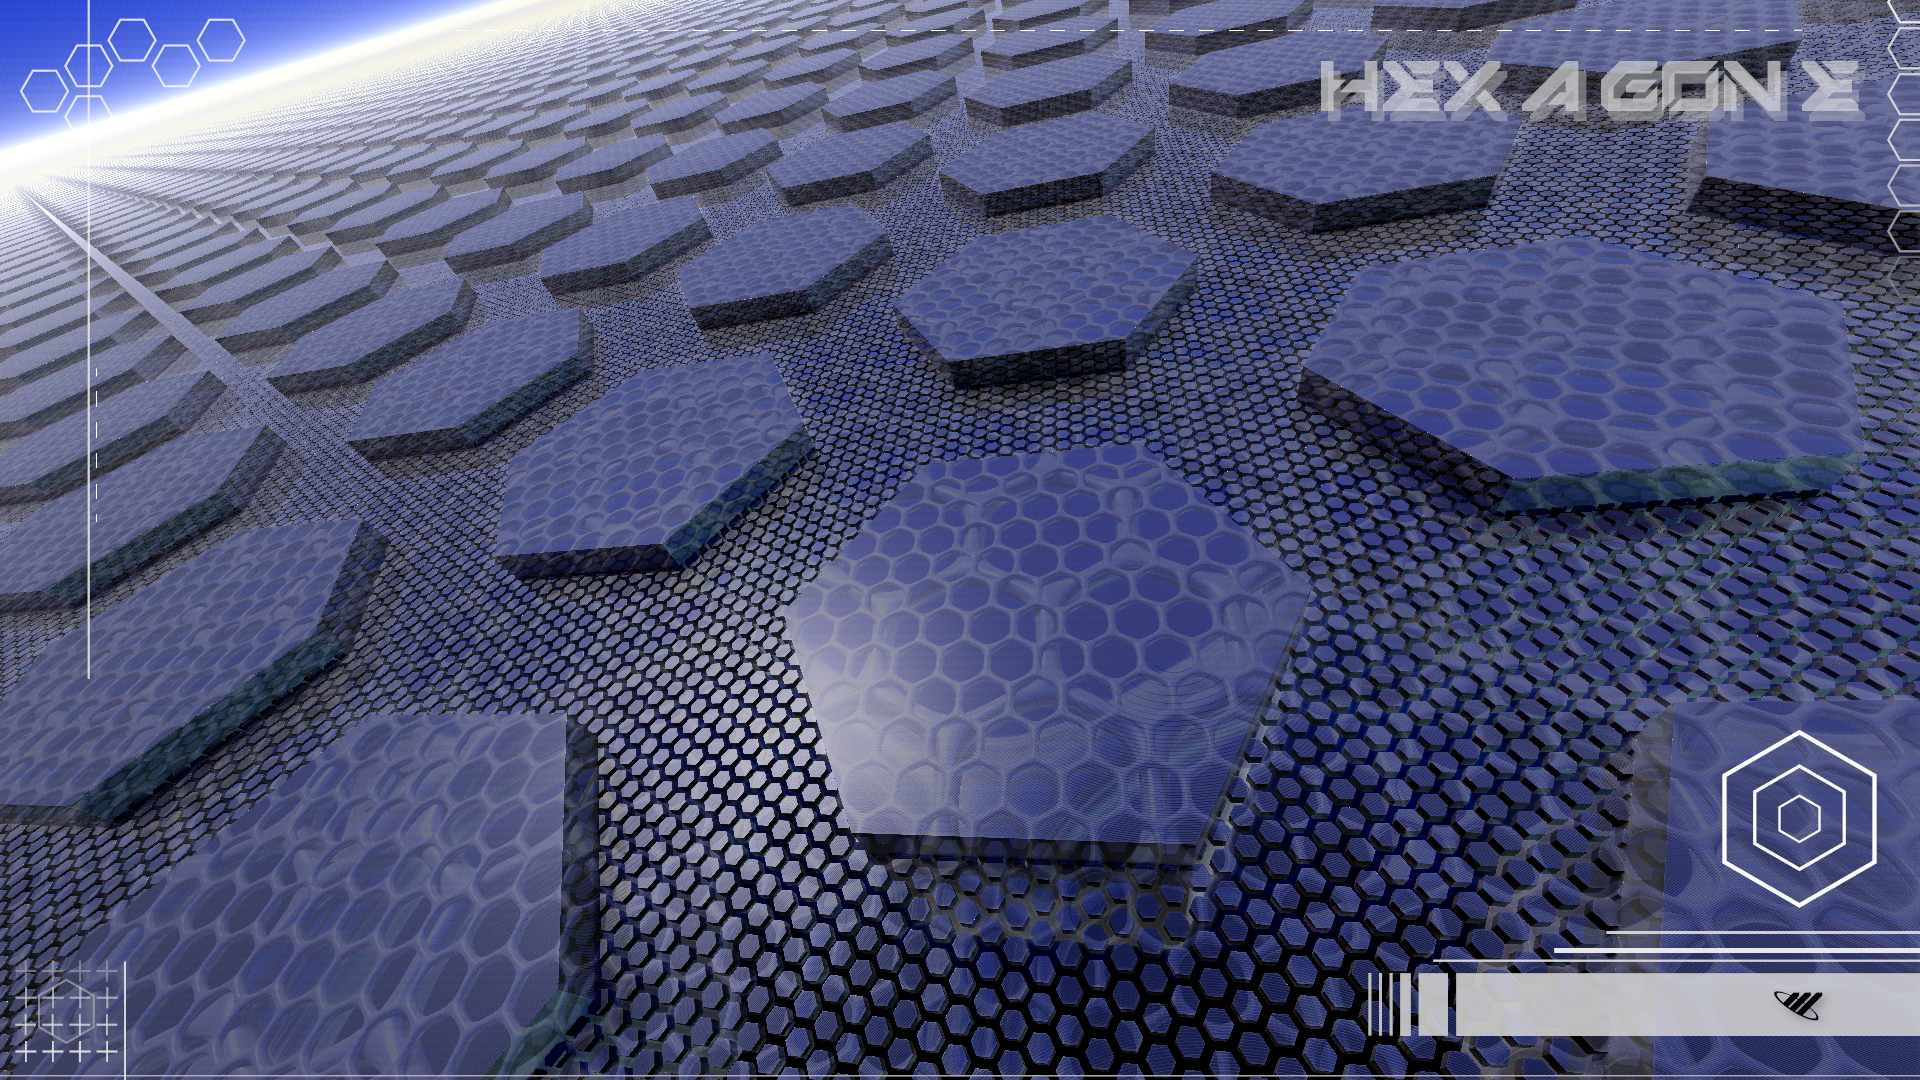 Hexagons with smaller hexagons around it. Top right text says hex-a-gon-e.